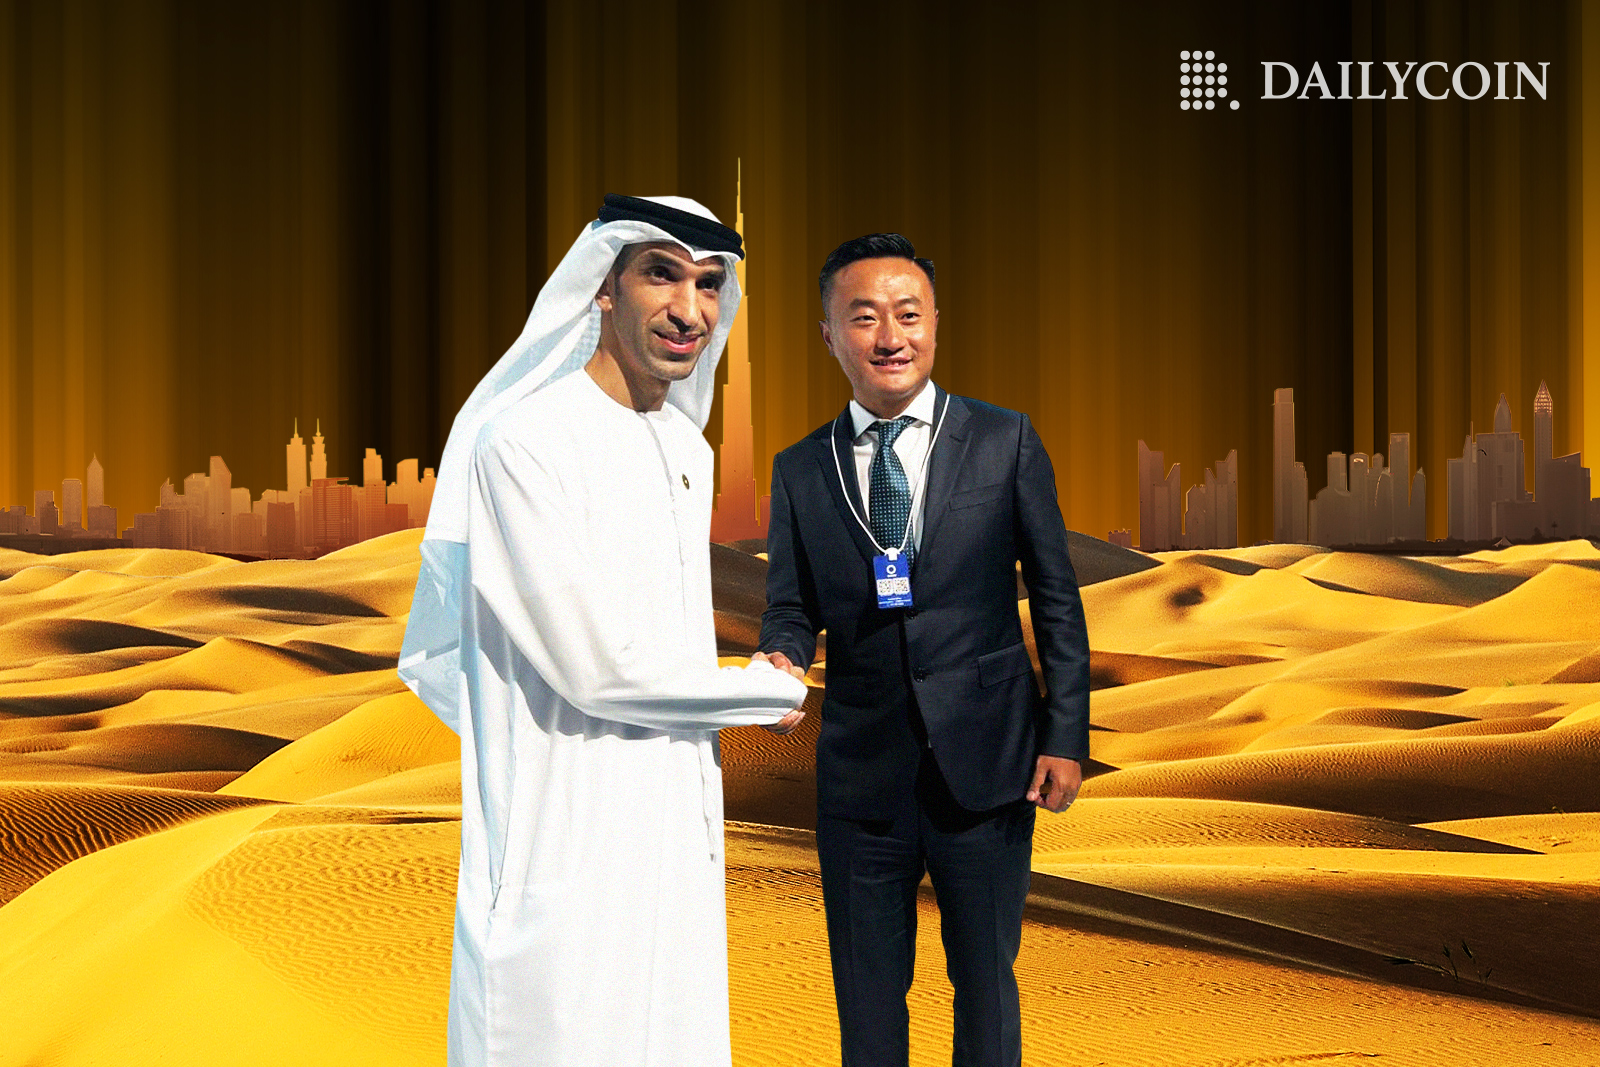 Bybit CEO shaking hands with a Dubai official in the desert.